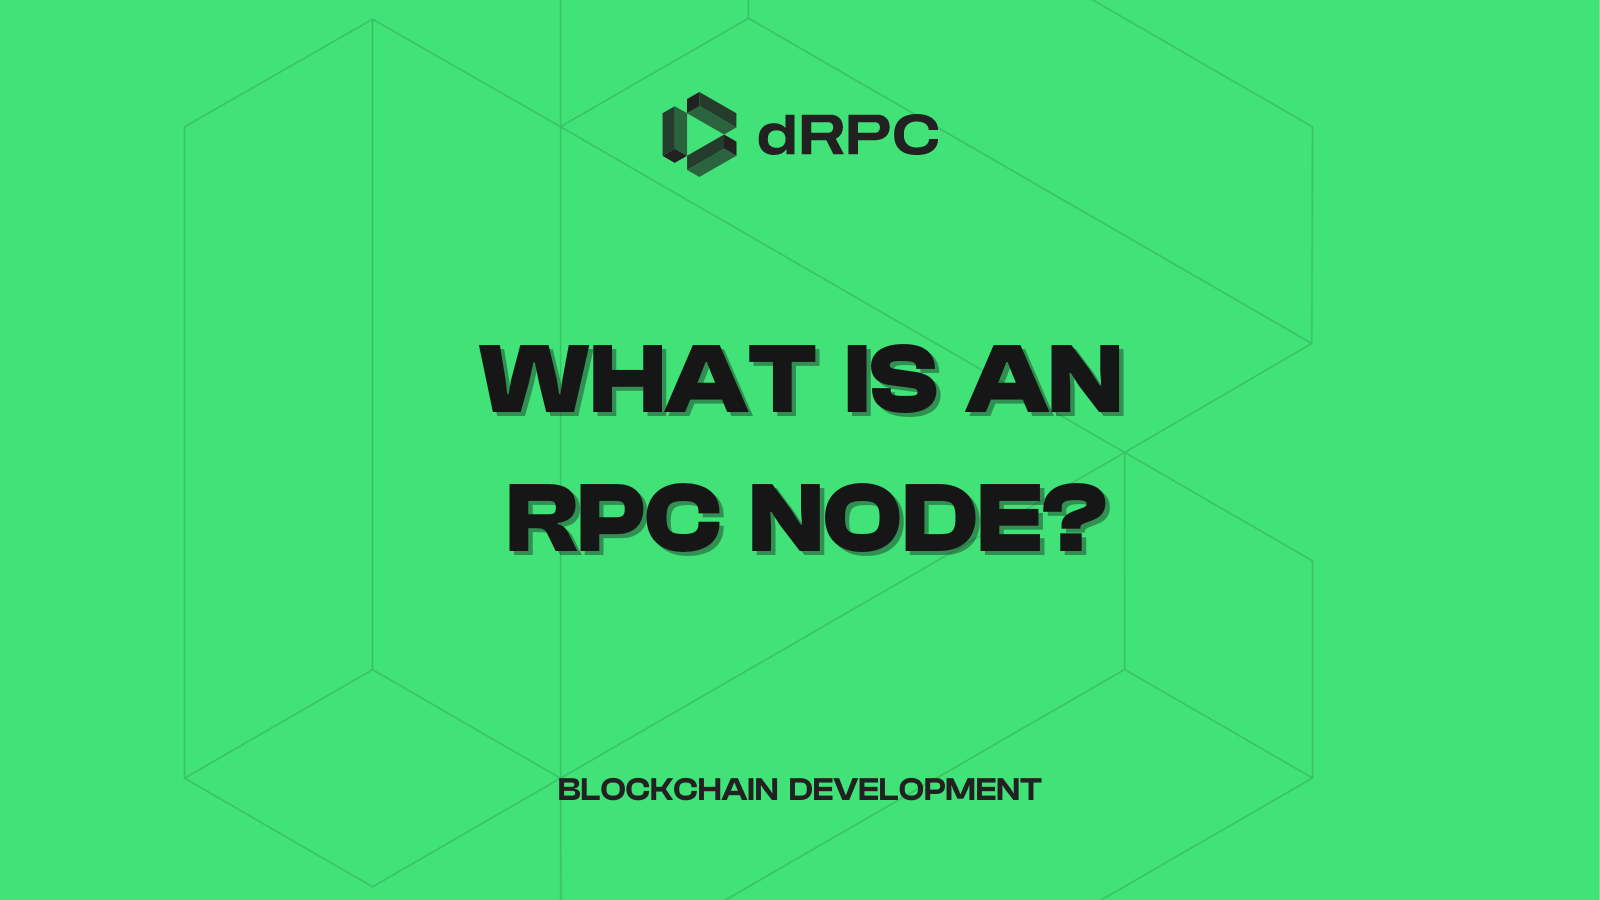 What is an RPC node?